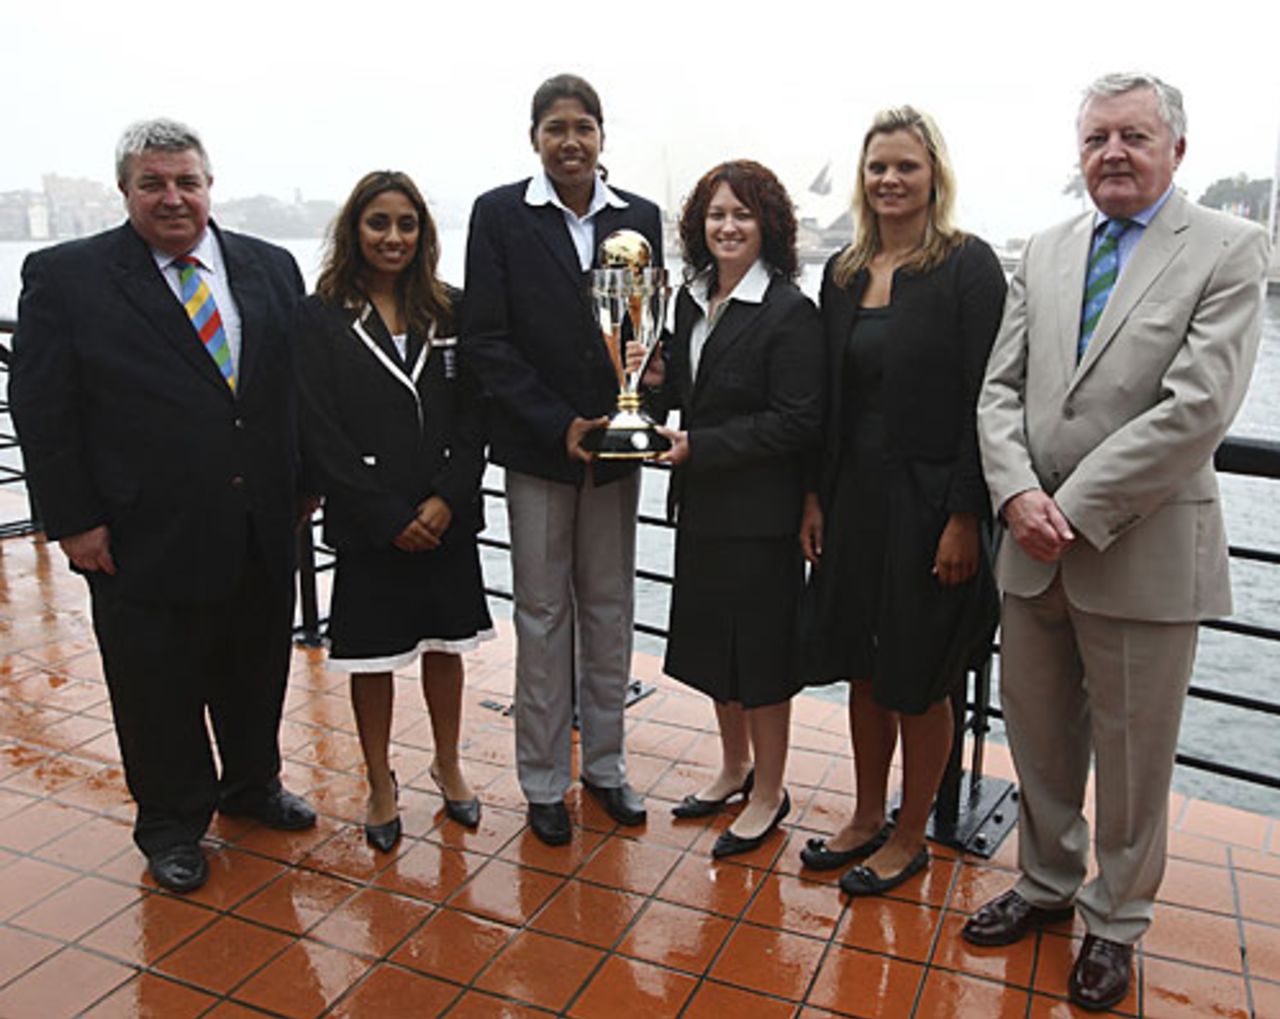 Jack Clarke, the chairman of Cricket Australia, Isa Guha, Jhulan Goswami, Karen Rolton, Suzie Bates and David Morgan, the ICC president, with the World Cup trophy, Sydney, October 29, 2008